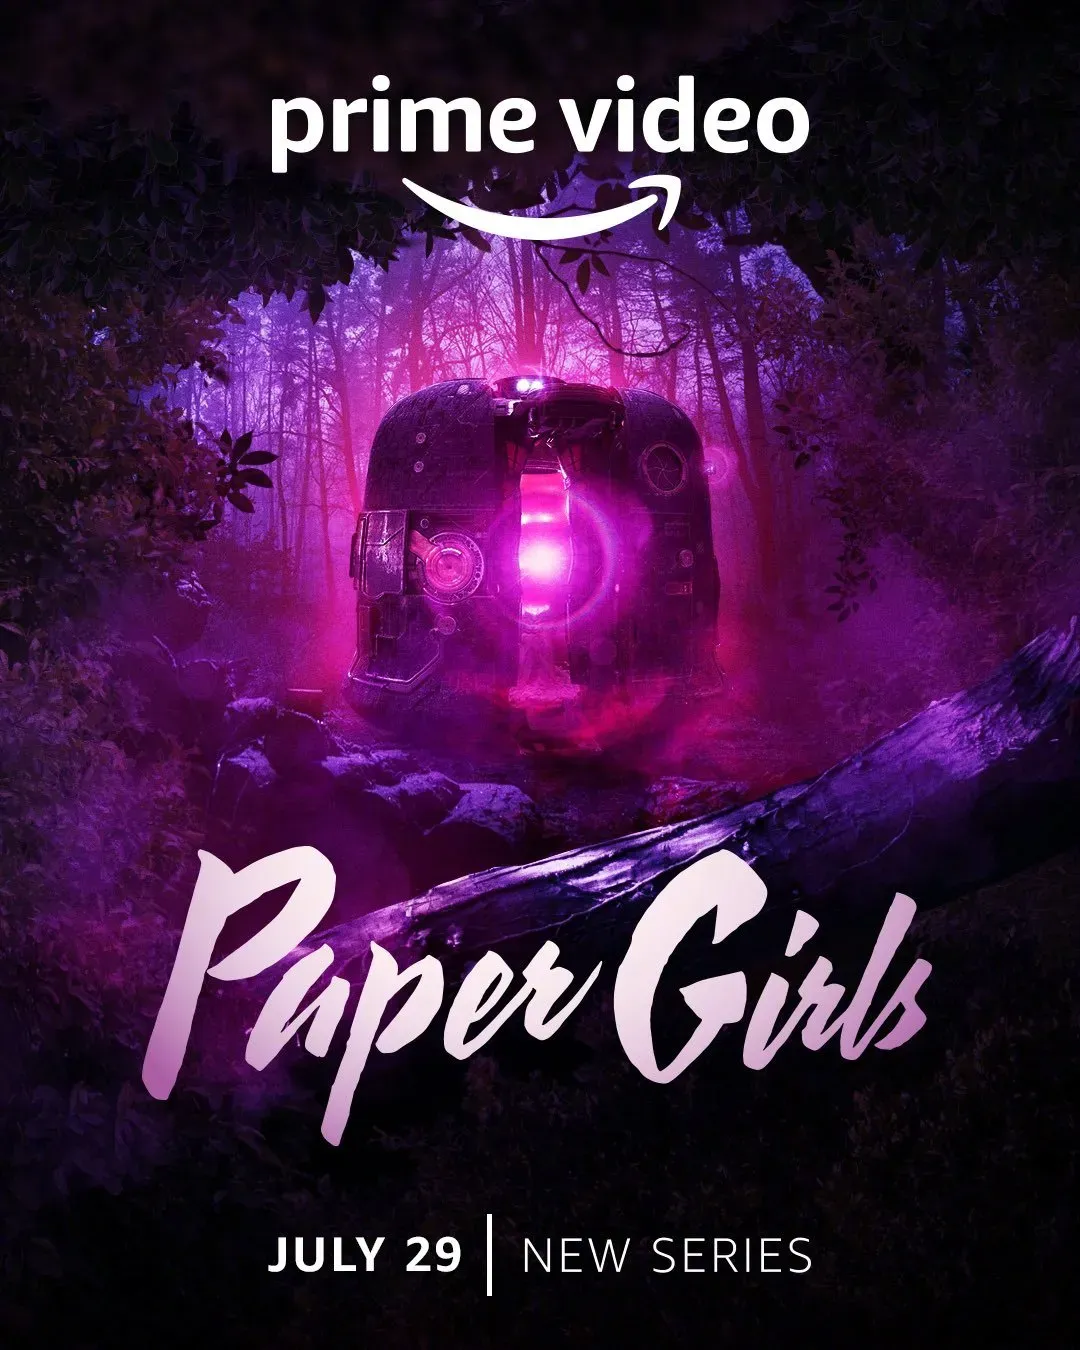 Sci-fi series "Paper Girls" releases teaser Chinese poster, it will be available on Amazon streaming on July 29